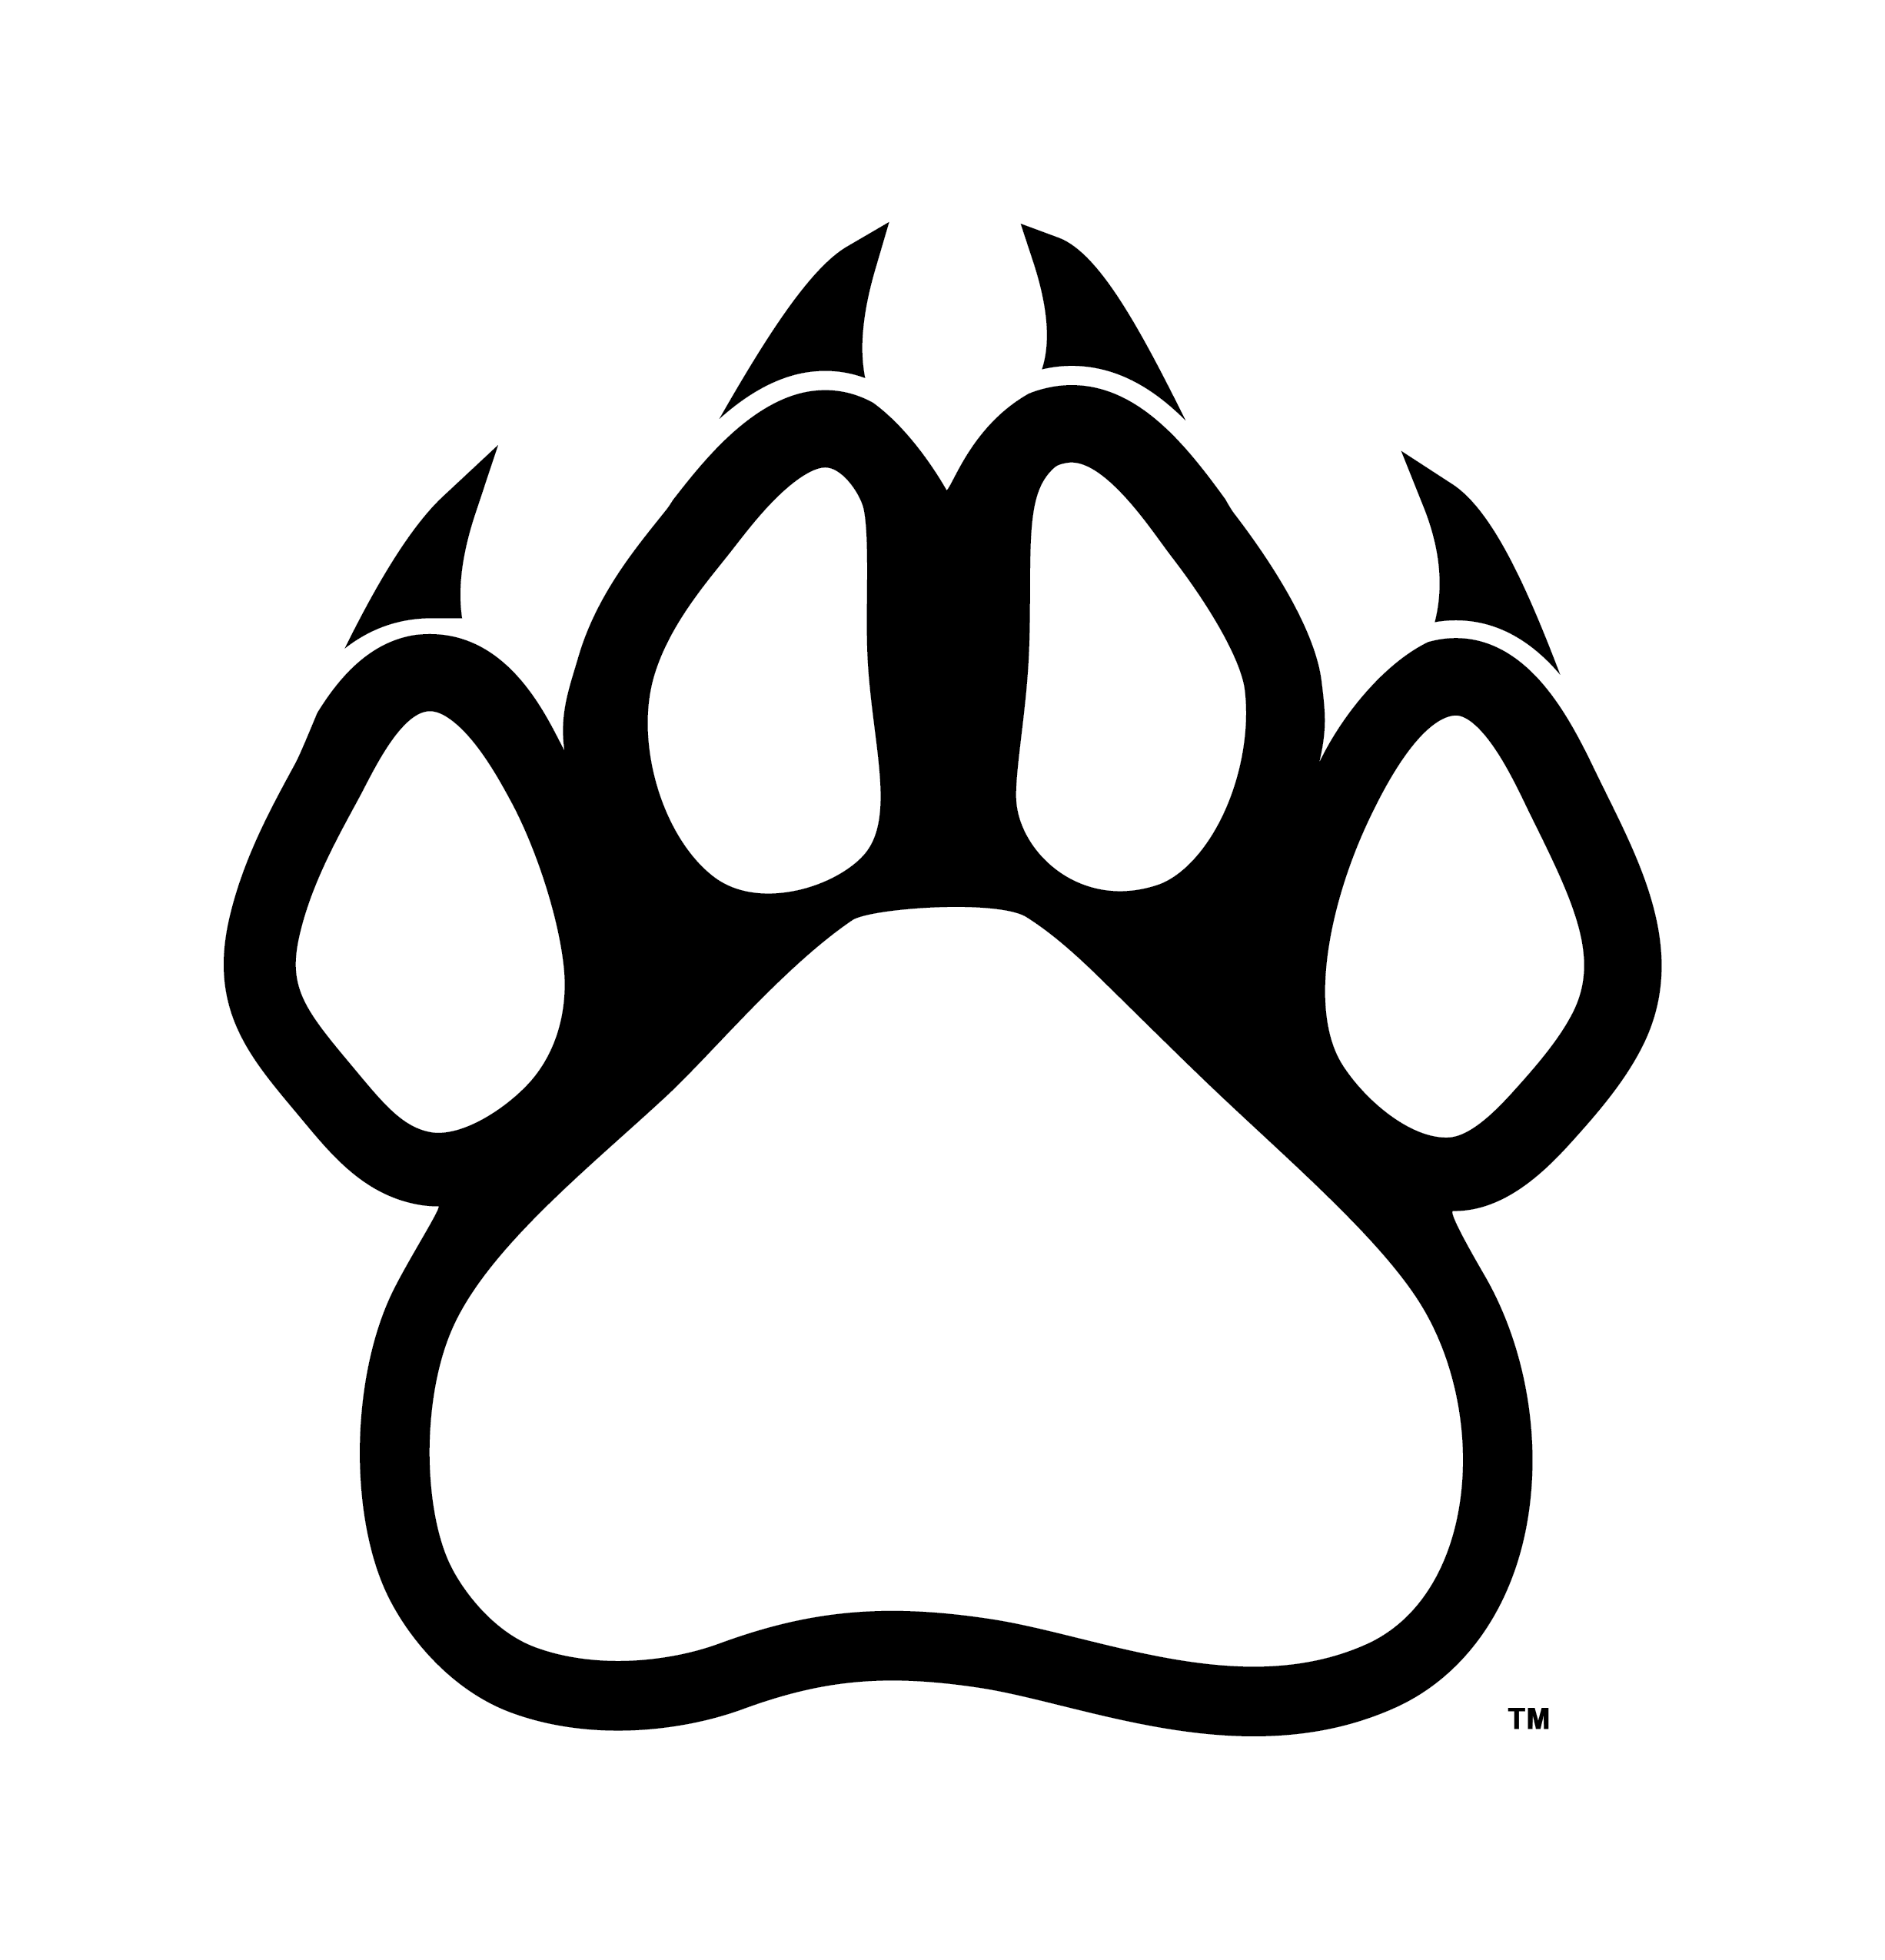 Cougar Paw Print Download On Hd Image Clipart